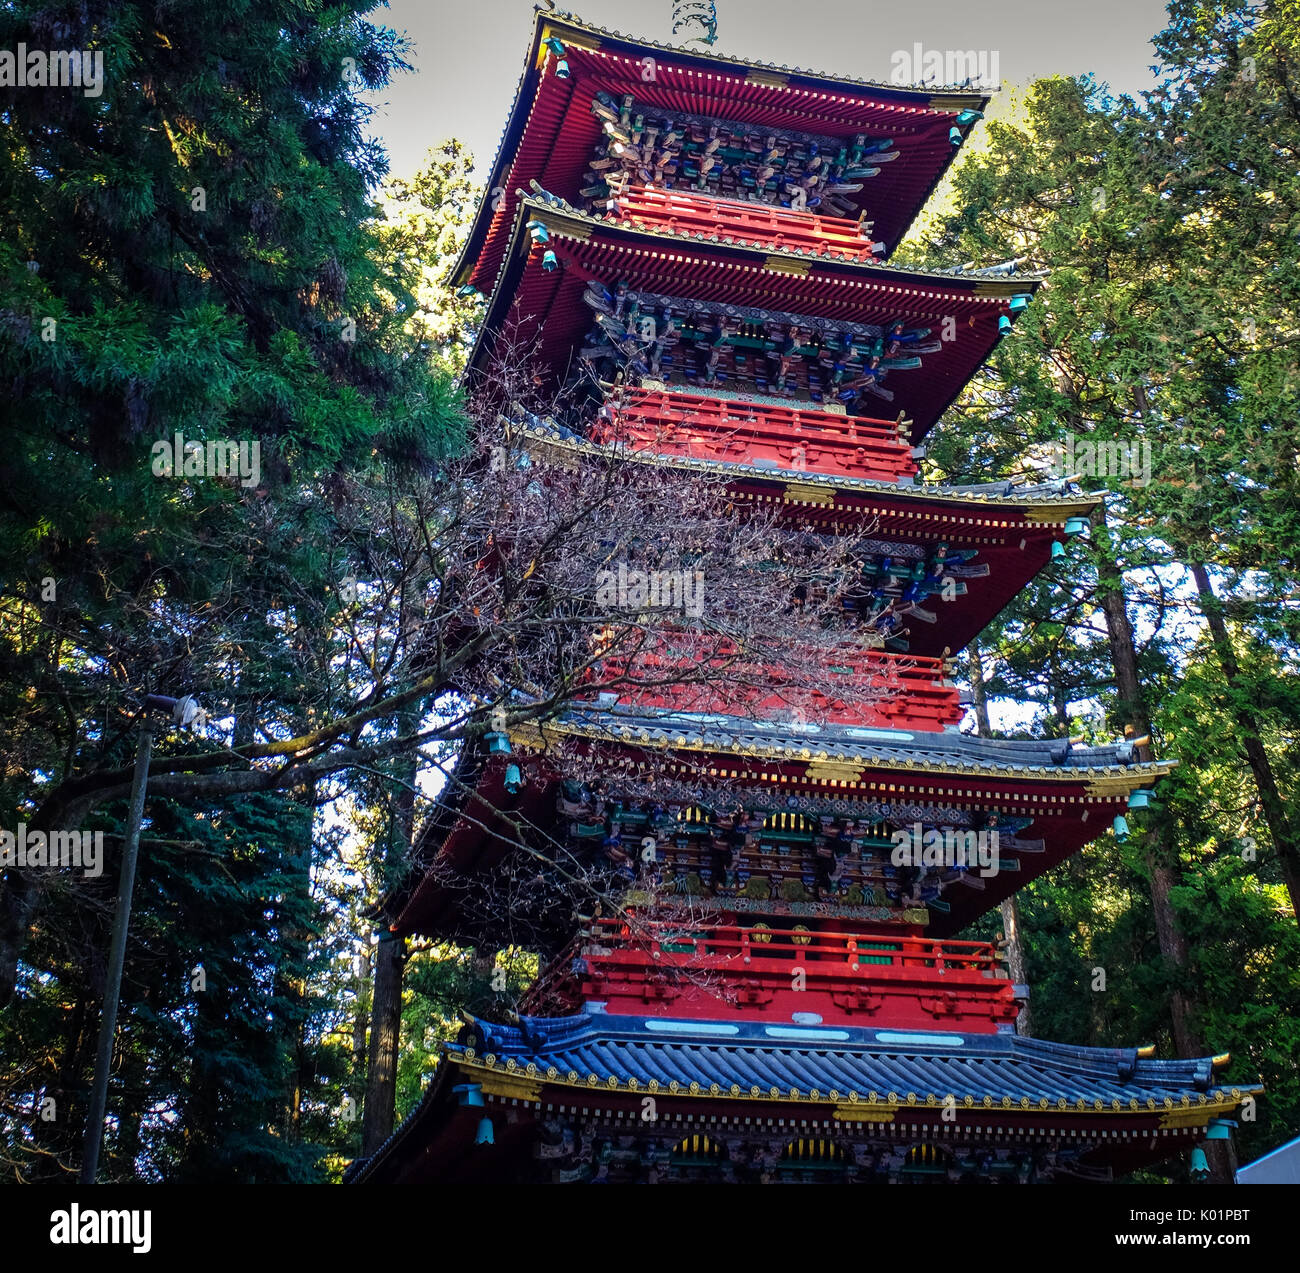 Tower of Toshogu Shrine in Nikko, Japan. Toshogu is part of the Shrines and Temples of Nikko, a UNESCO World Heritage Site. Stock Photo